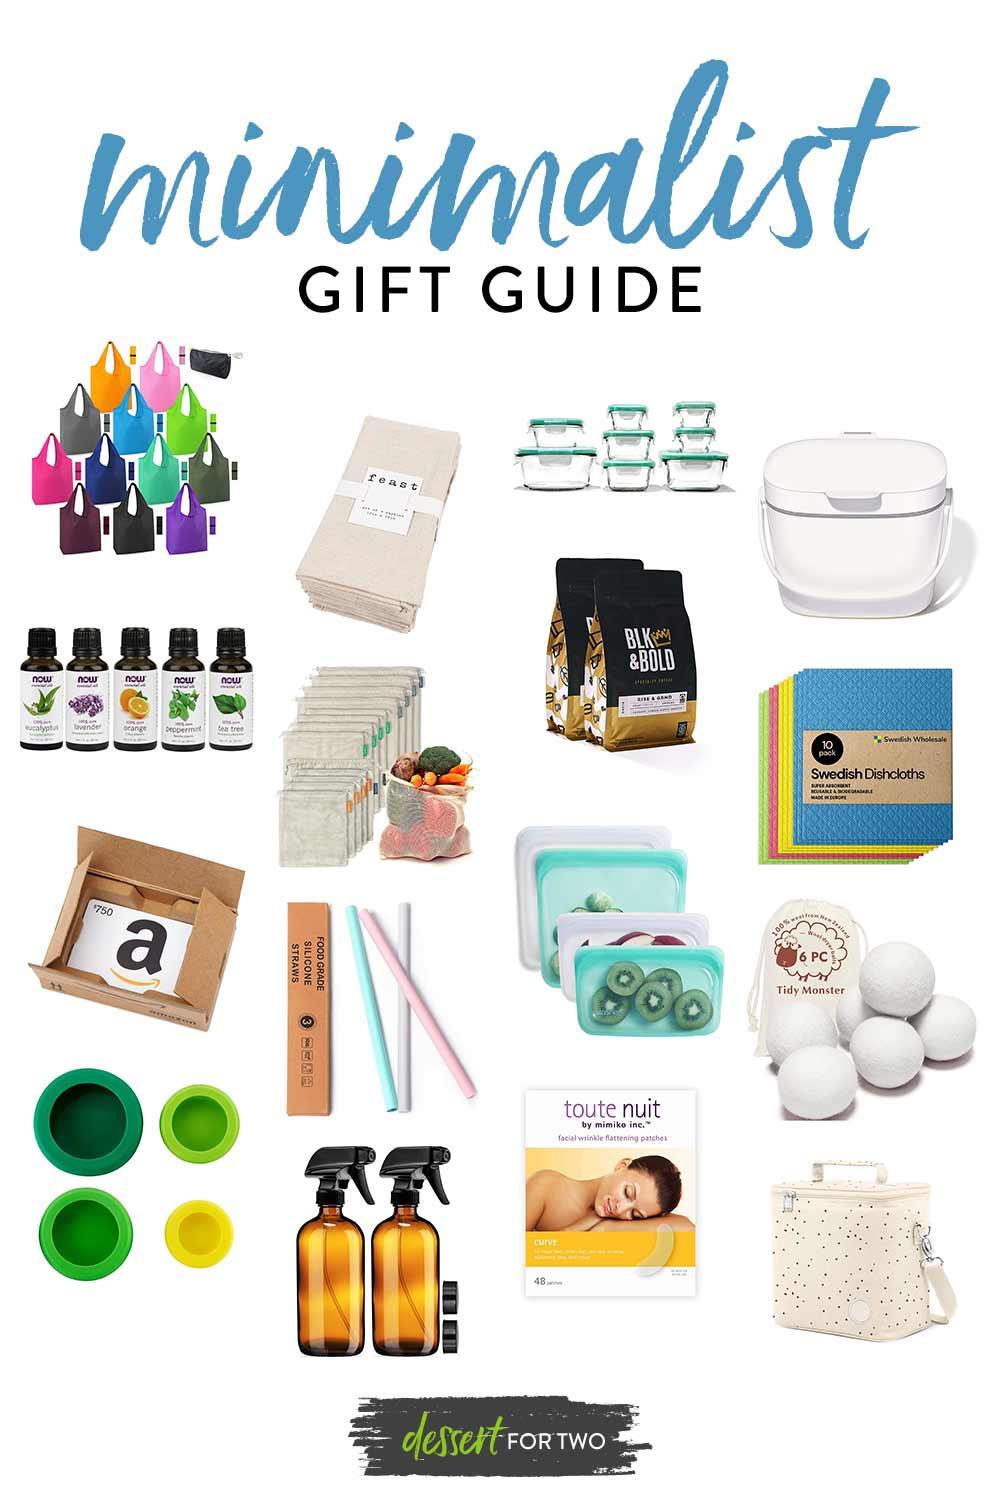 Minimalist gift guide white graphic with images of presents.